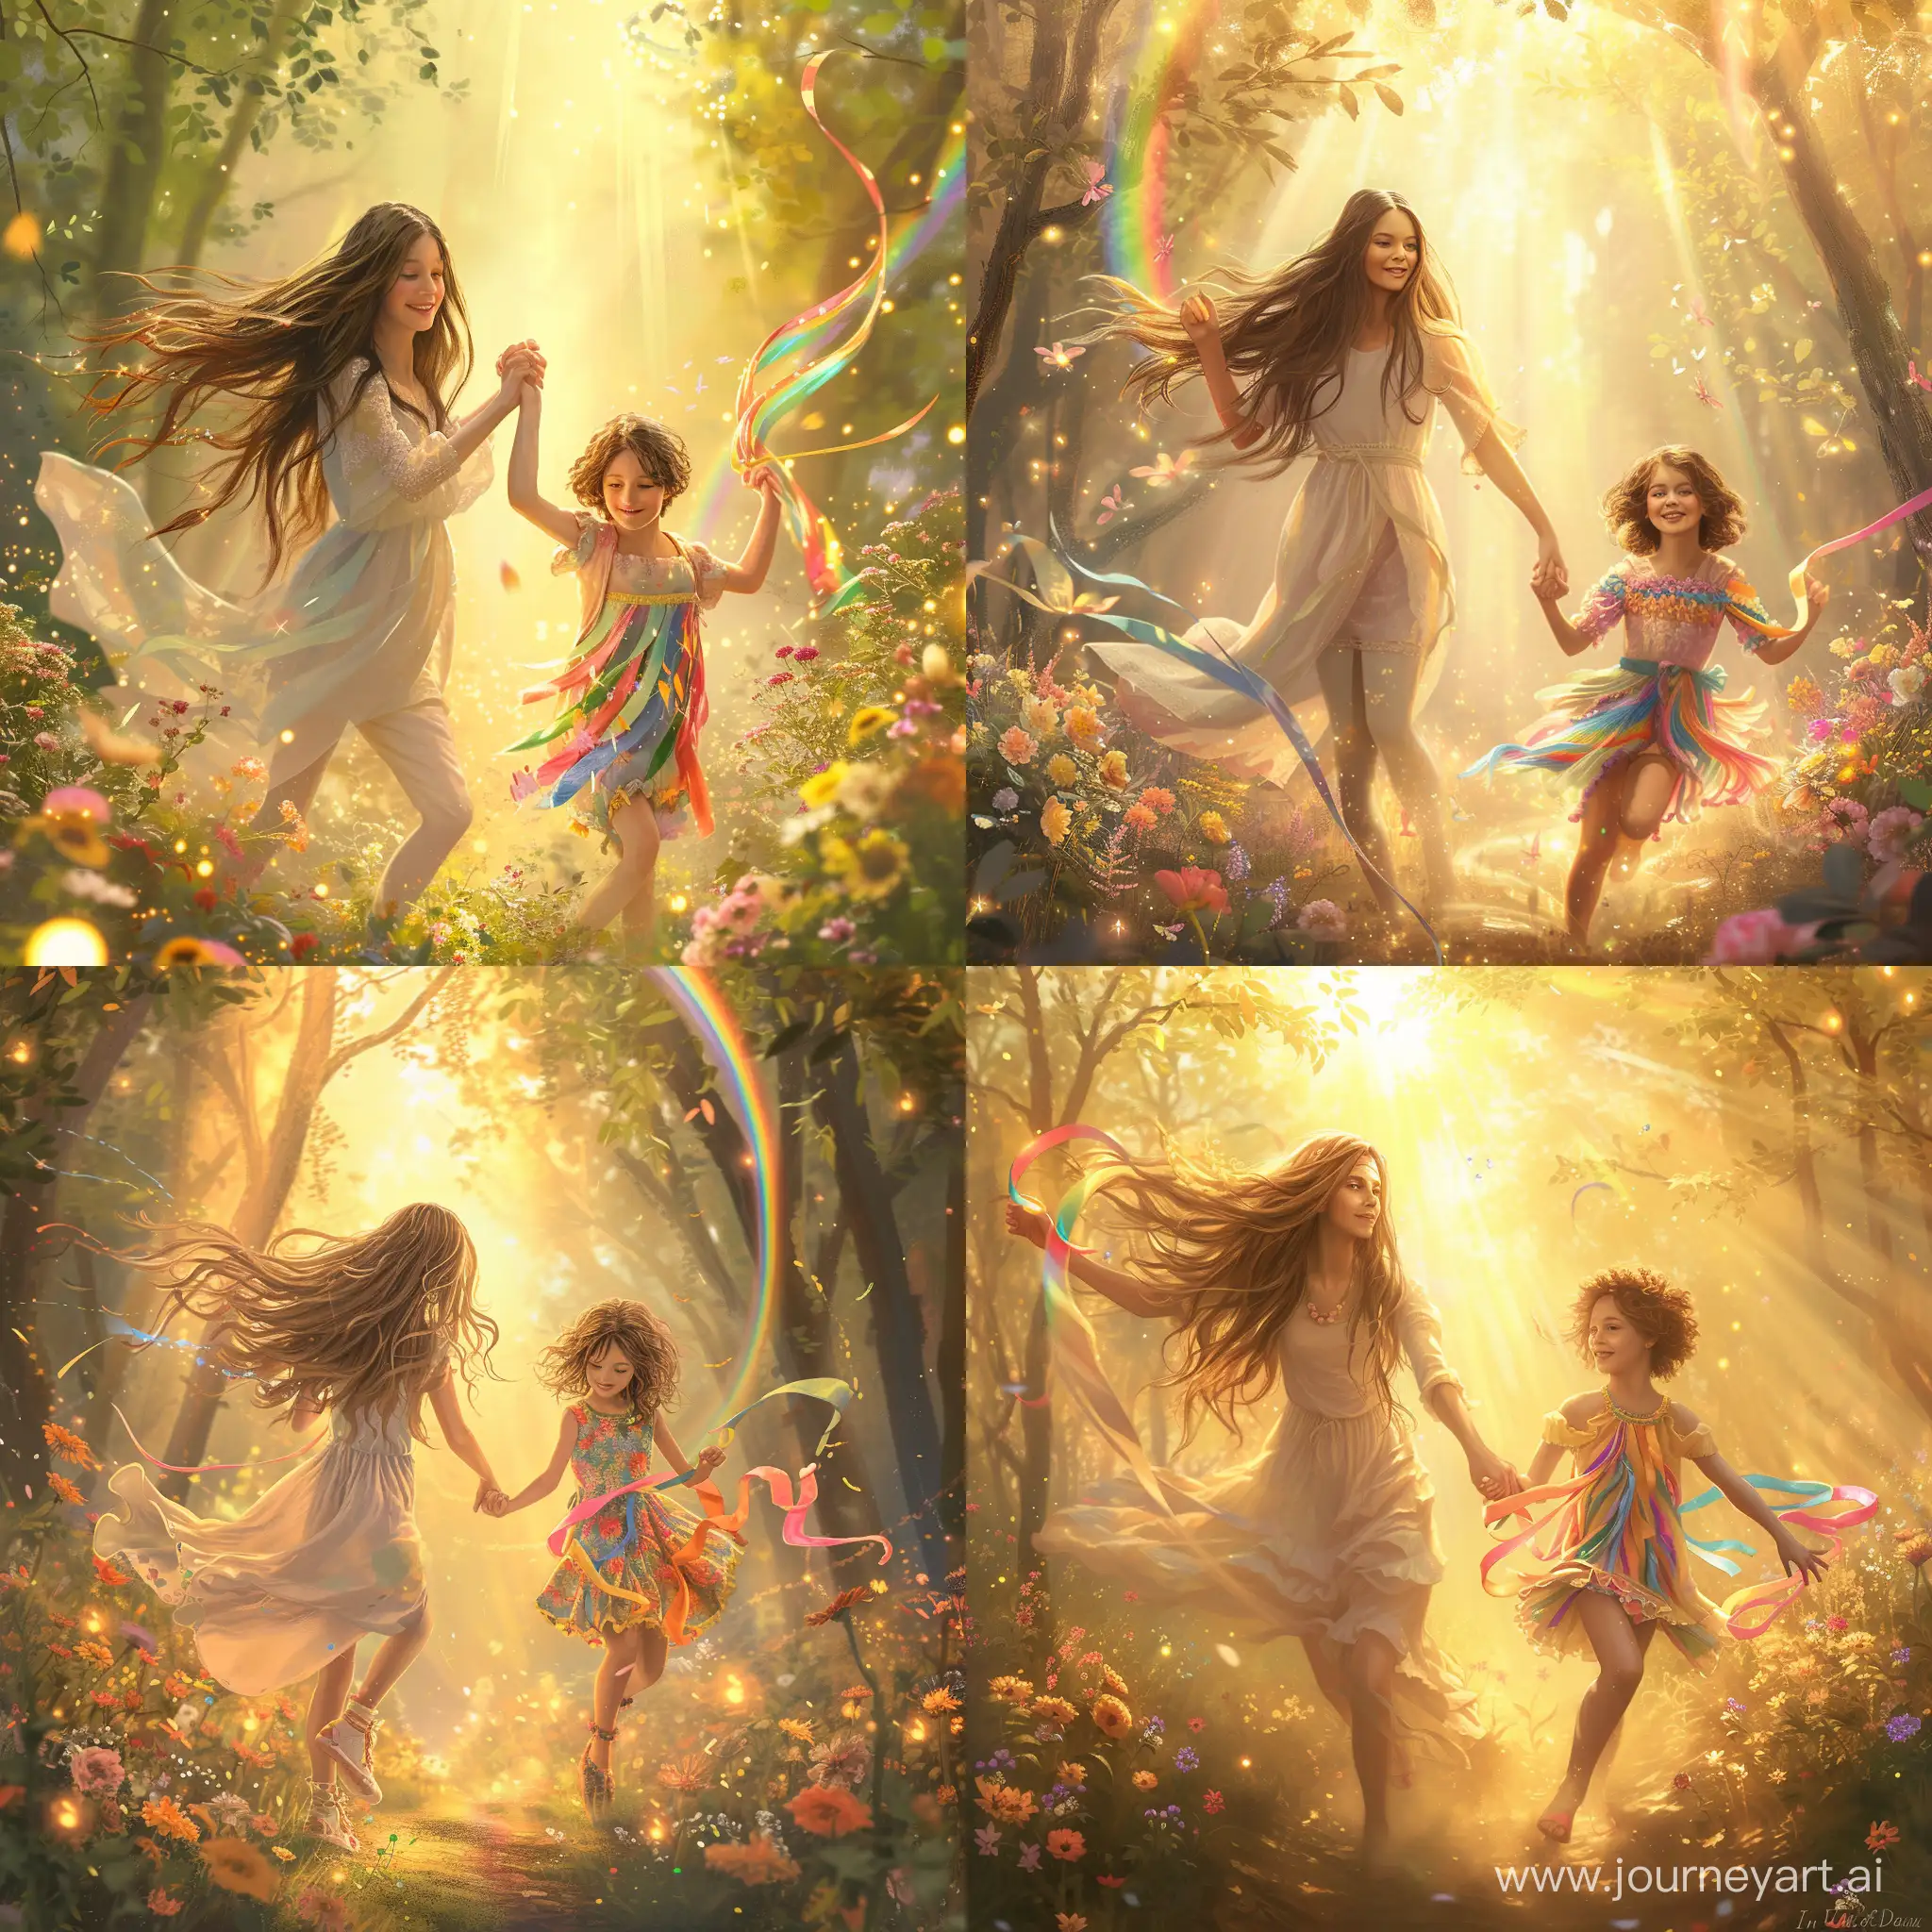 Create an image depicting two sisters, Olive and Maia, holding hands and running through a magical, sunlit forest filled with blooming flowers and twinkling fireflies. Olive, the older sister, with long, flowing hair, is dressed in a light, pastel outfit that flutters in the wind. Maia, the younger, with short, tousled hair, wears a colorful, joyful dress and holds a colorful ribbon in her other hand, which dances in the air along with them. In the background, a rainbow and golden rays of sunlight piercing through the tree leaves are visible, adding warmth and a magical glow to the scene. The image should be full of life, joy, and carefreeness, reflecting the theme of the song 'In the Land of Carefree Days', with an emphasis on the unbreakable bond and happy moments shared by the sisters.